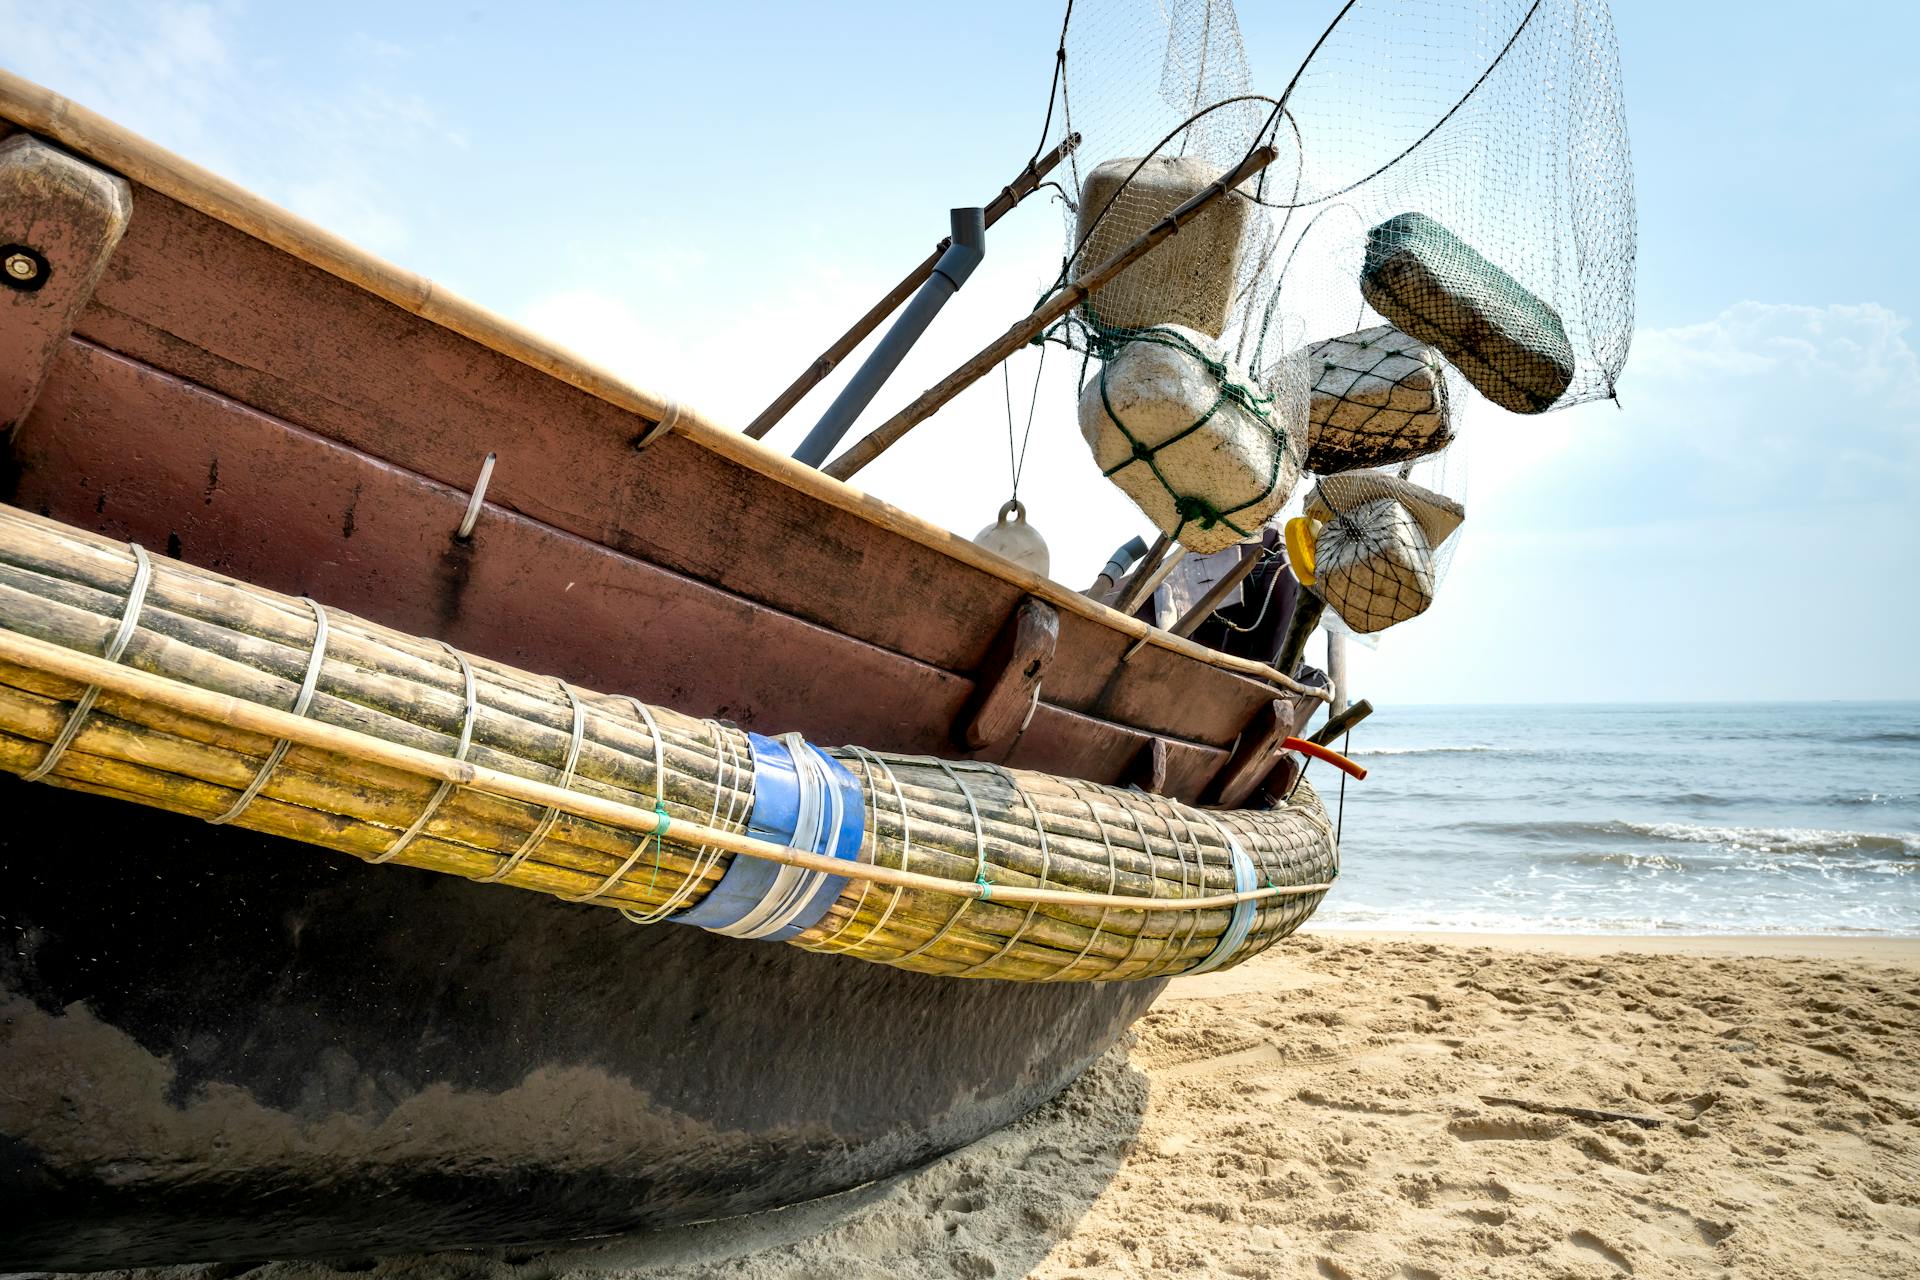 Fishing boat with equipment on ocean shore in sunlight